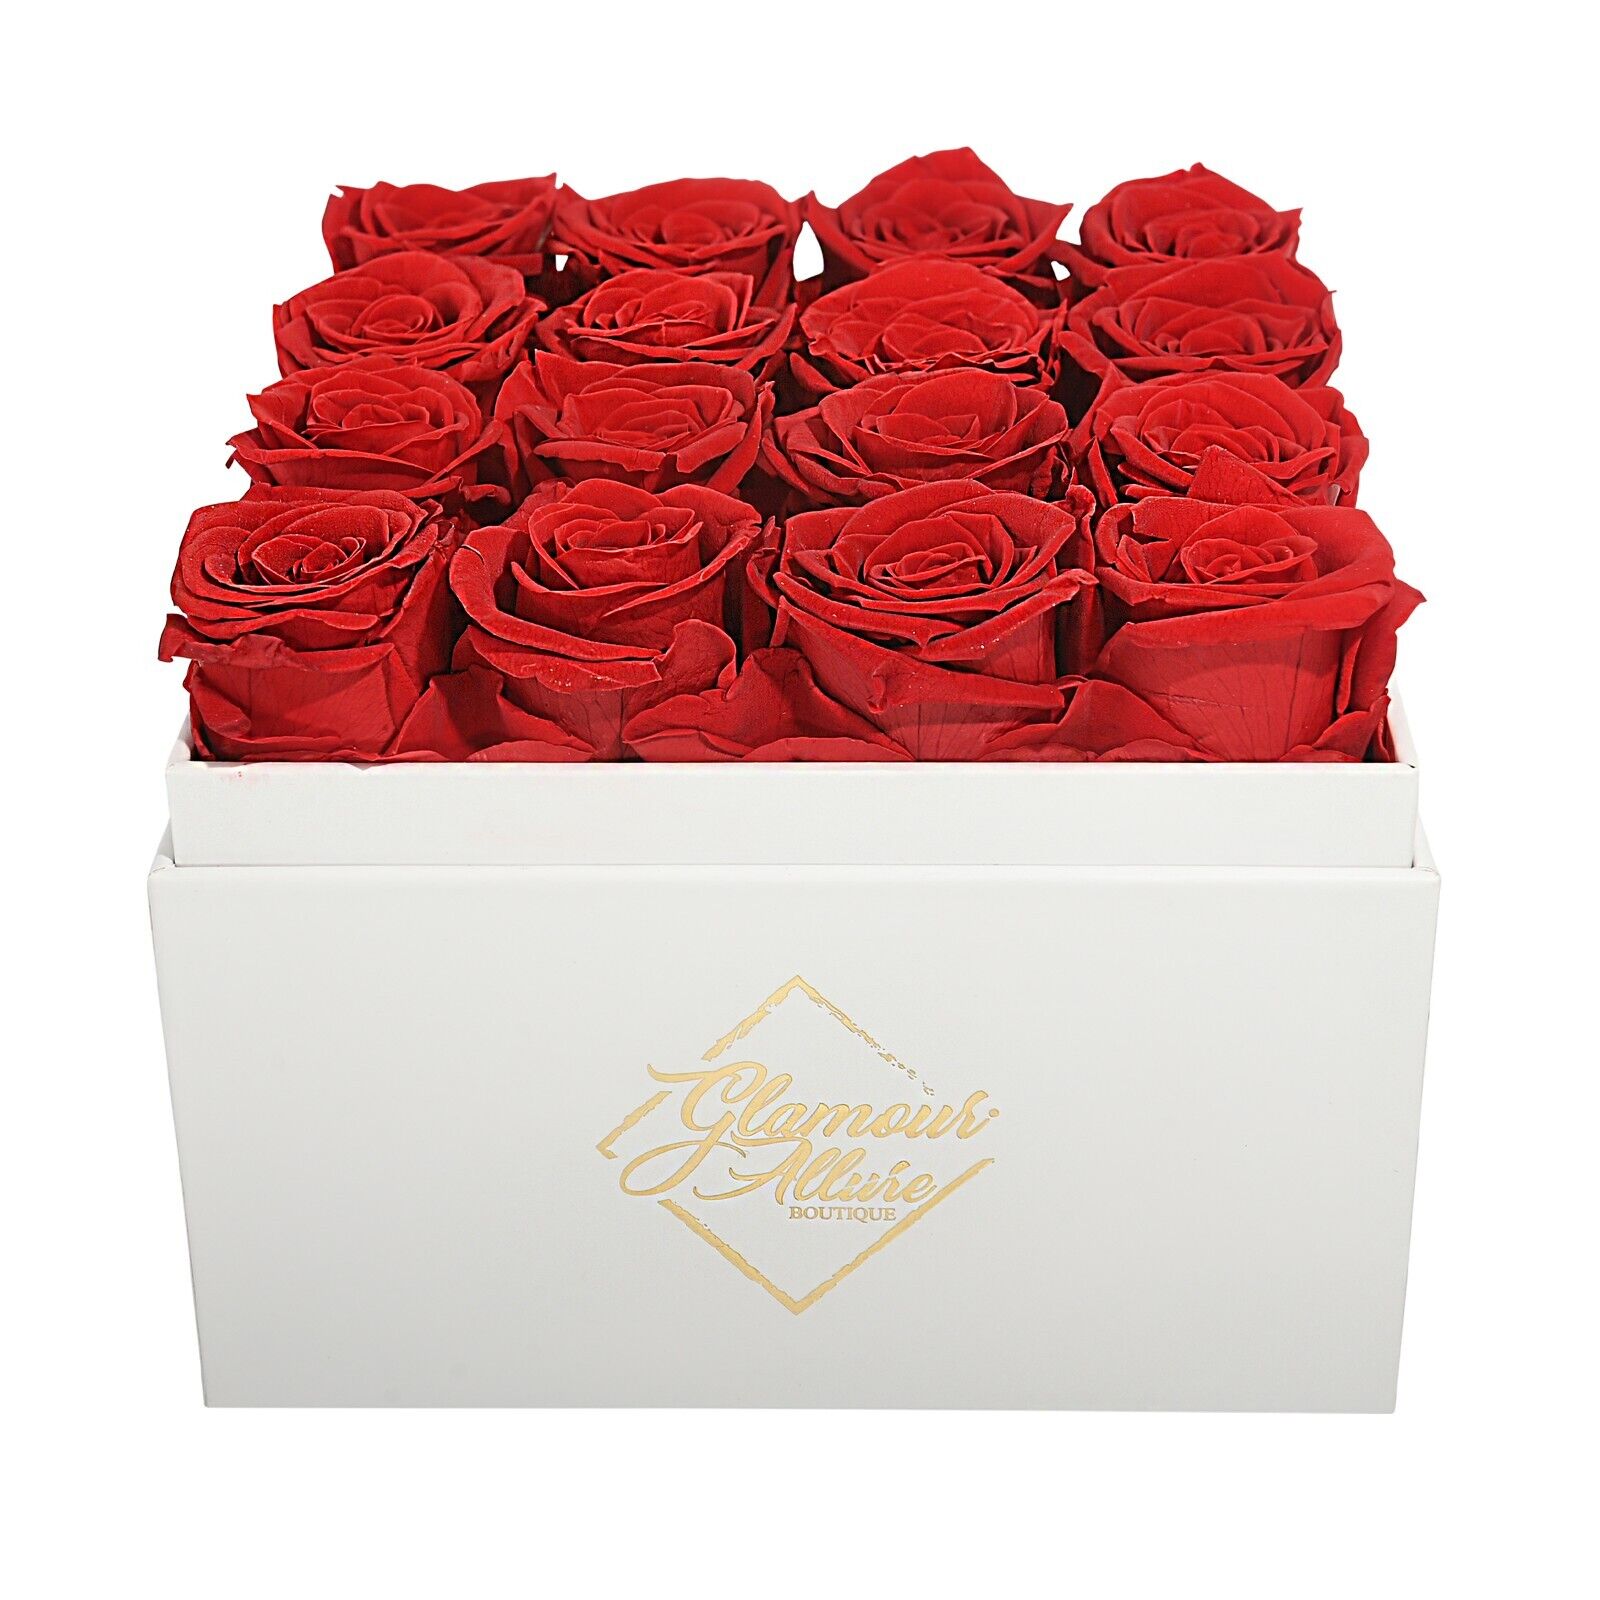 Handmade Preserved Real Roses in a Gift Box - 16 roses - Preserved Flowers Glamour Allure Boutoque - фотография #3